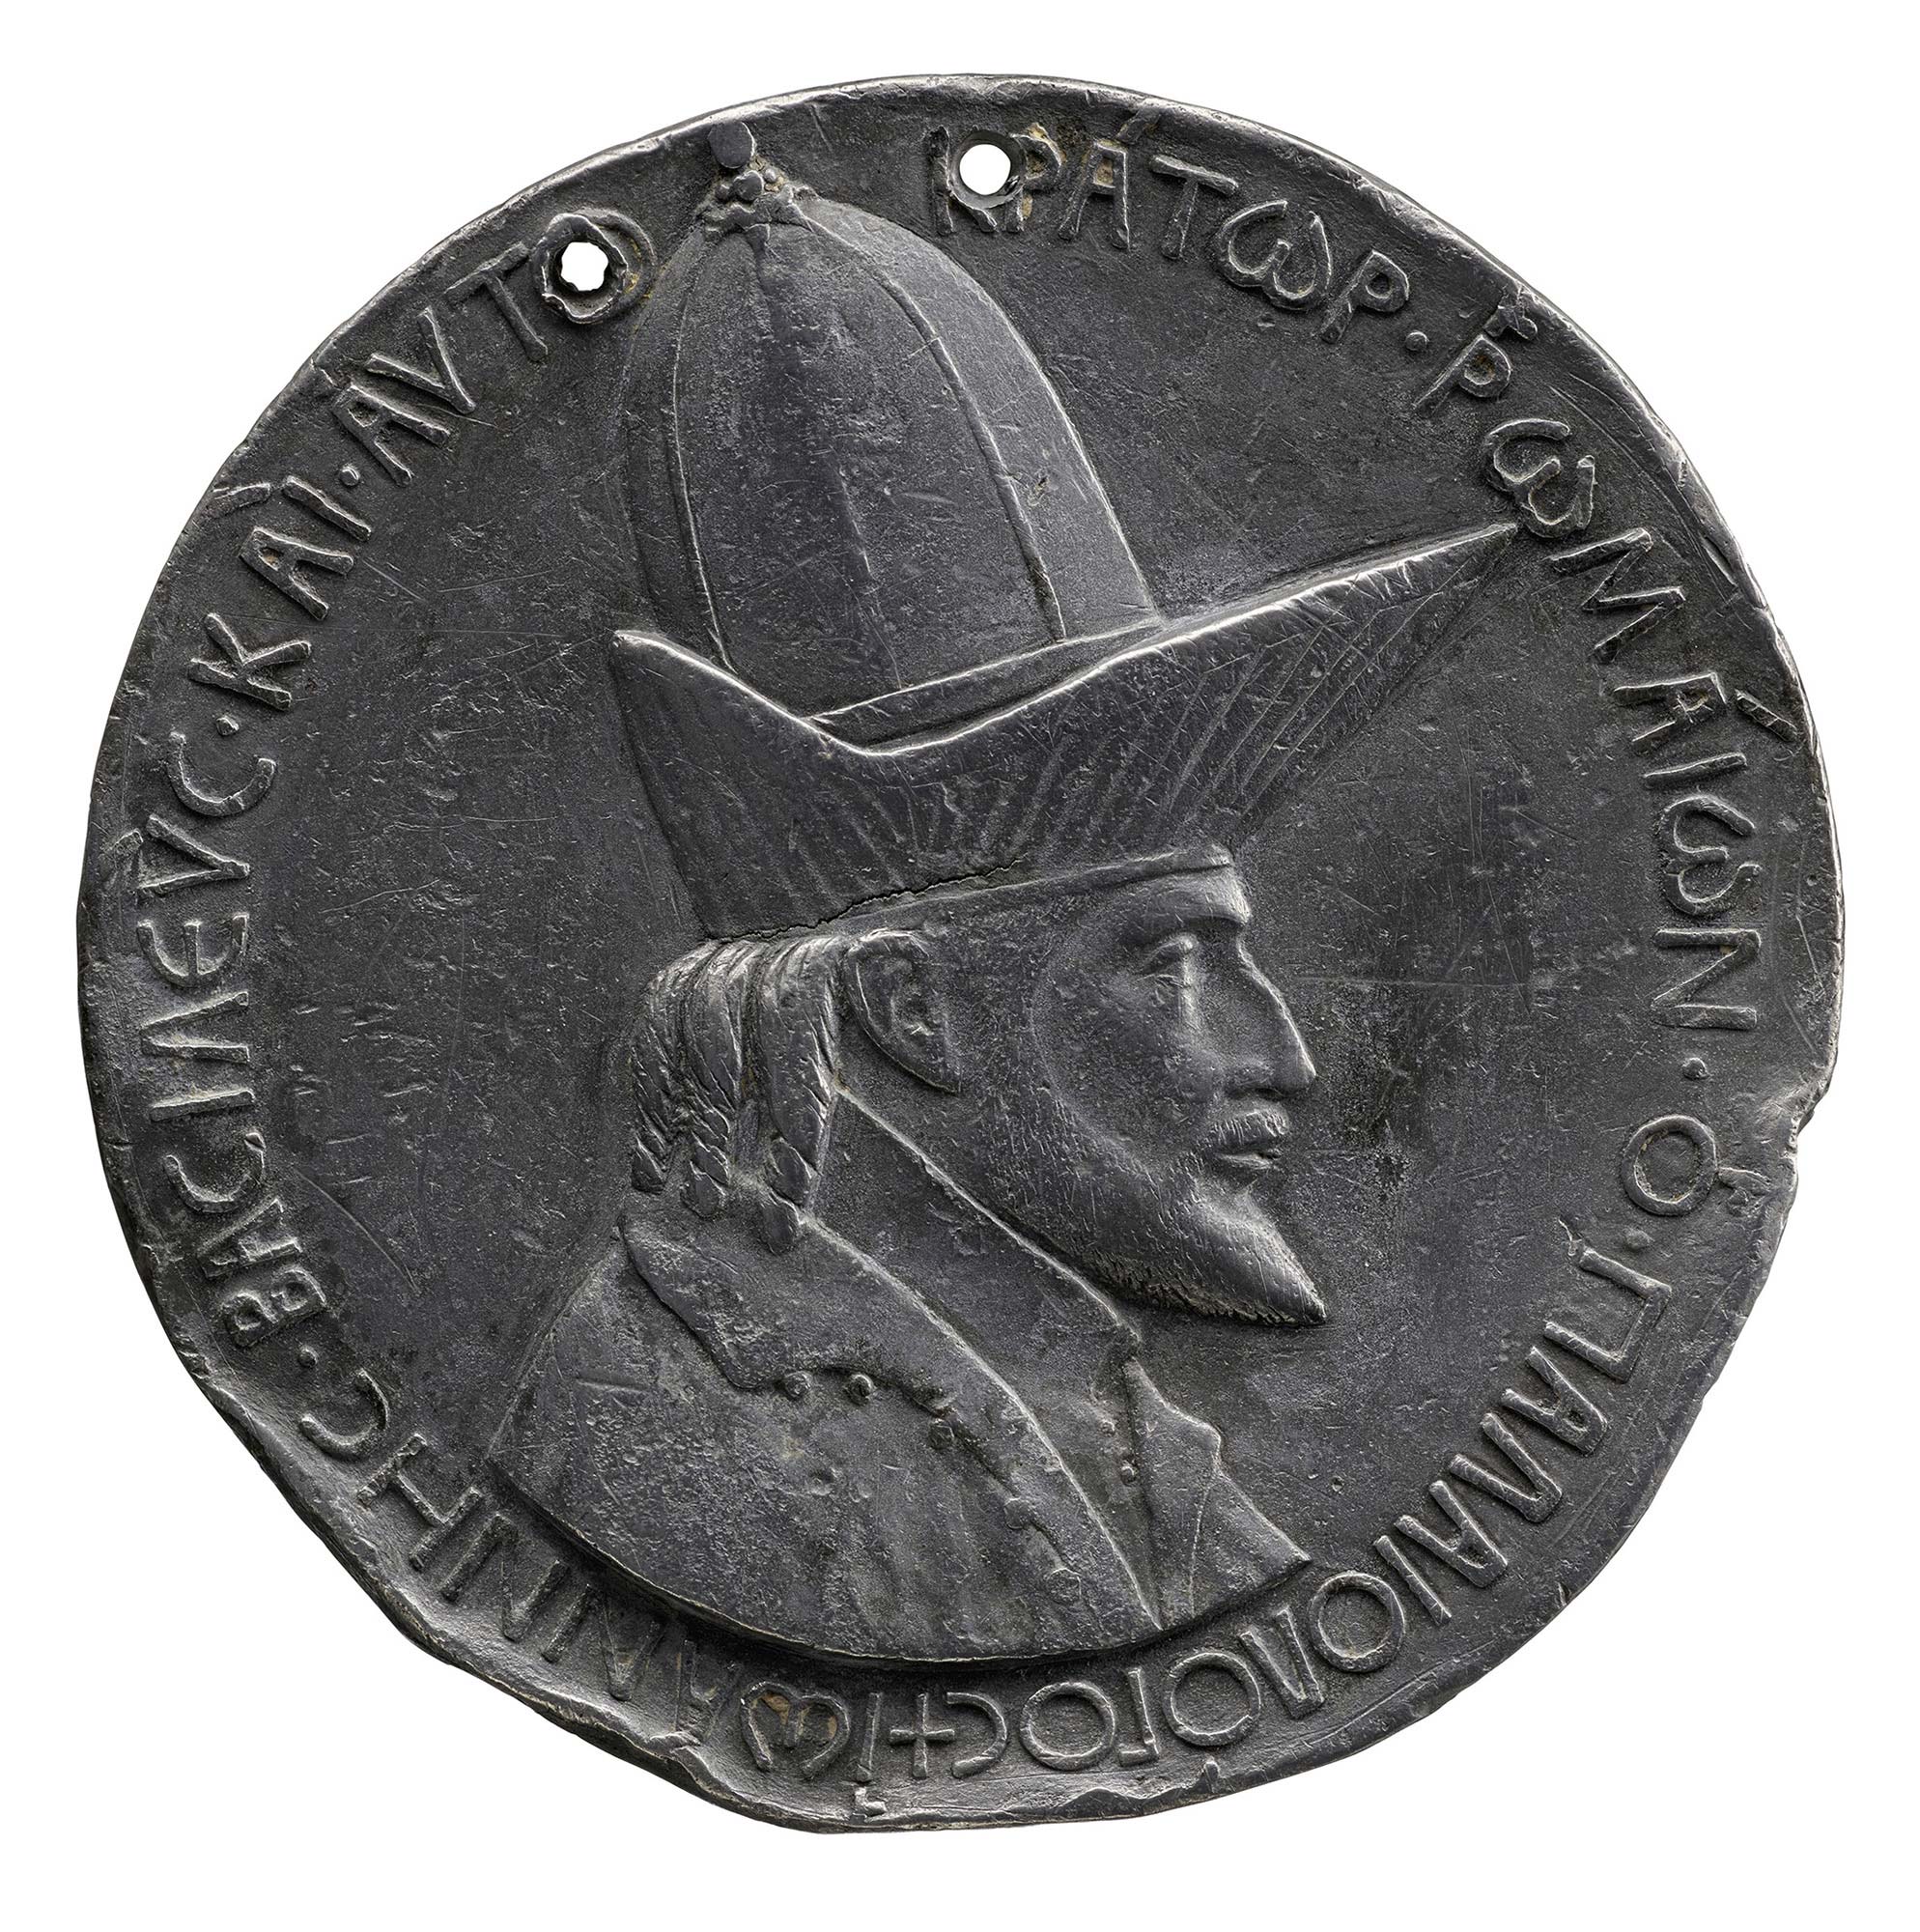 Lead portrait medal of Emperor John VIII Palaeologus wearing a large pointed hat in profile to the right